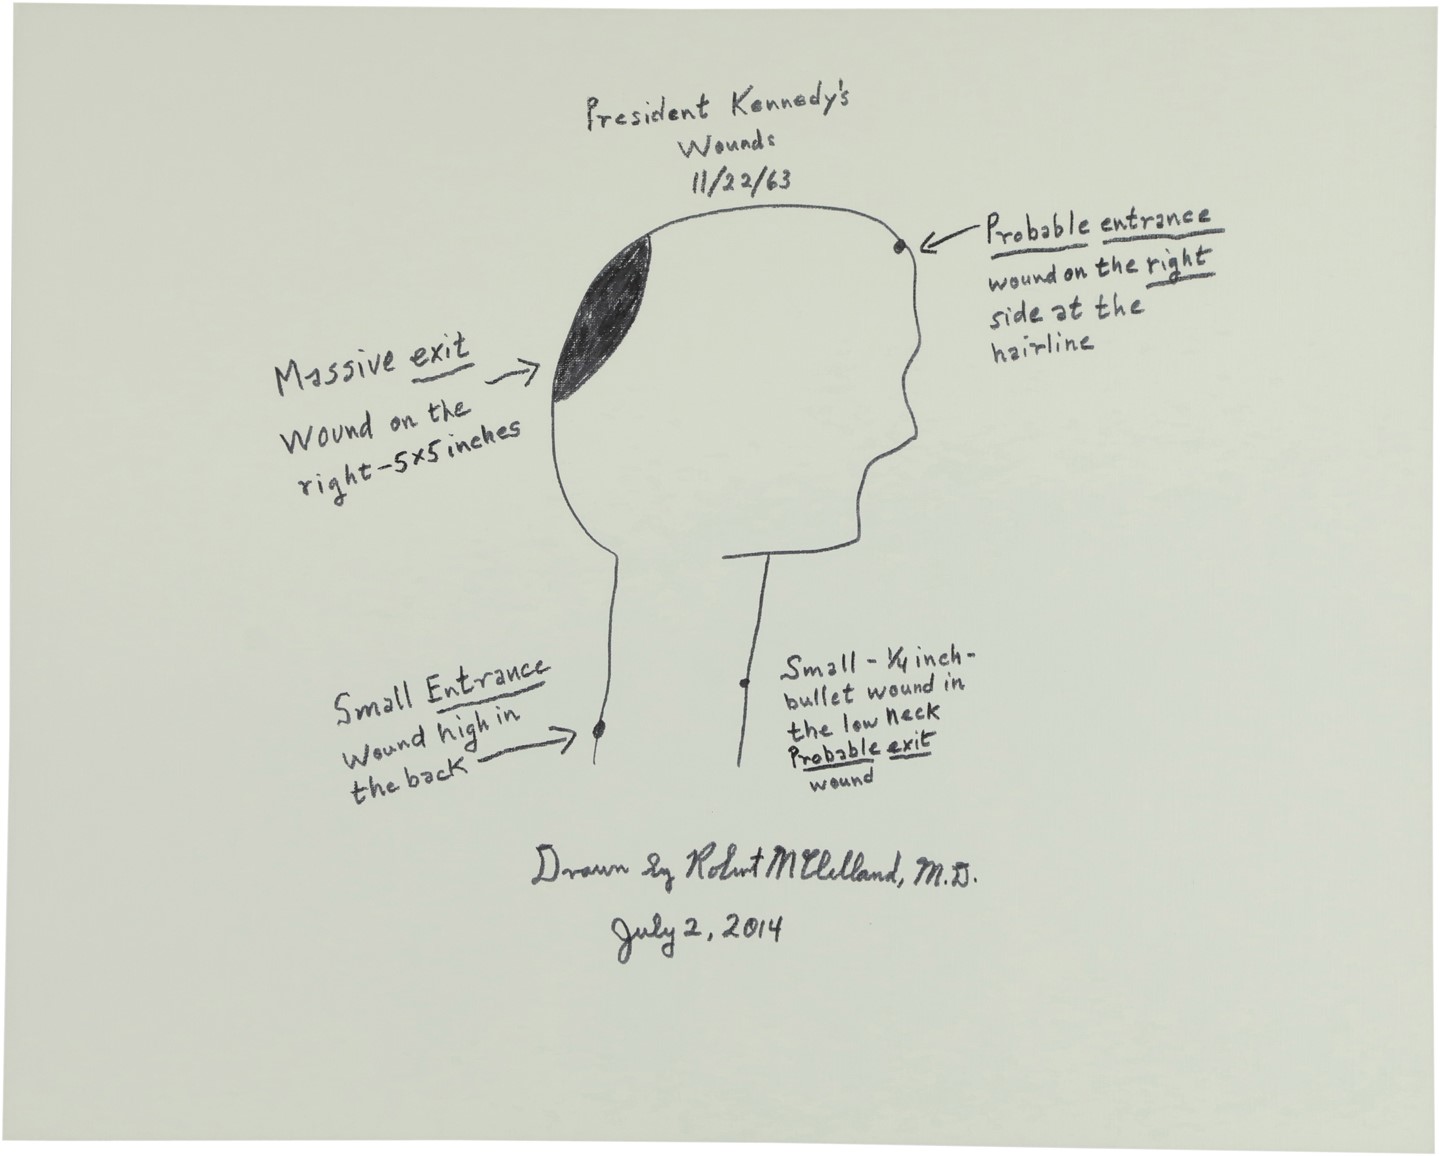 Rock And Pop Culture - "President Kennedy's Wounds" Hand Drawn Diagram by Dr. Robert McClelland